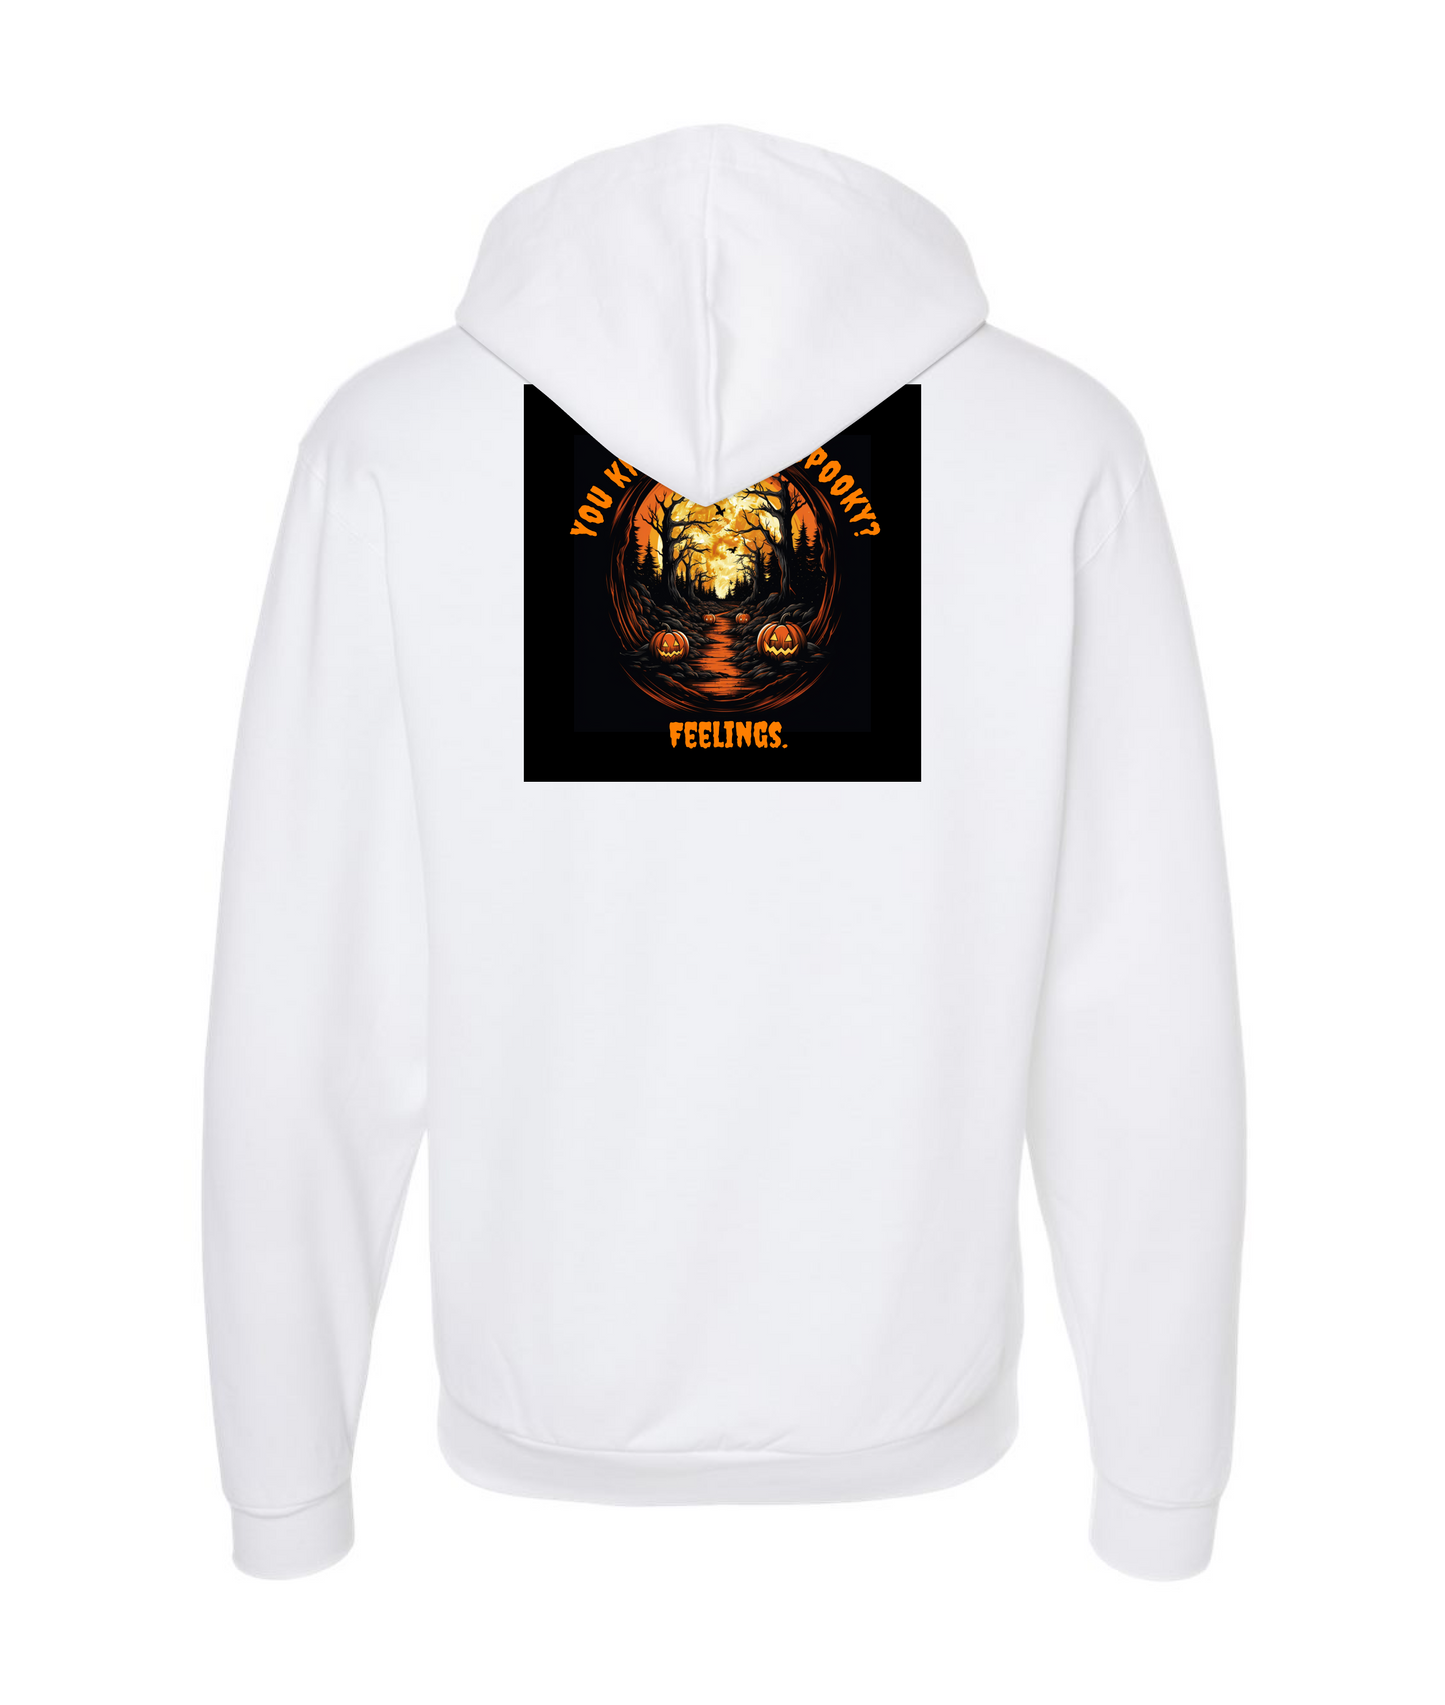 Echo Harbour - You Know What’s Spooky? - White Zip Up Hoodie